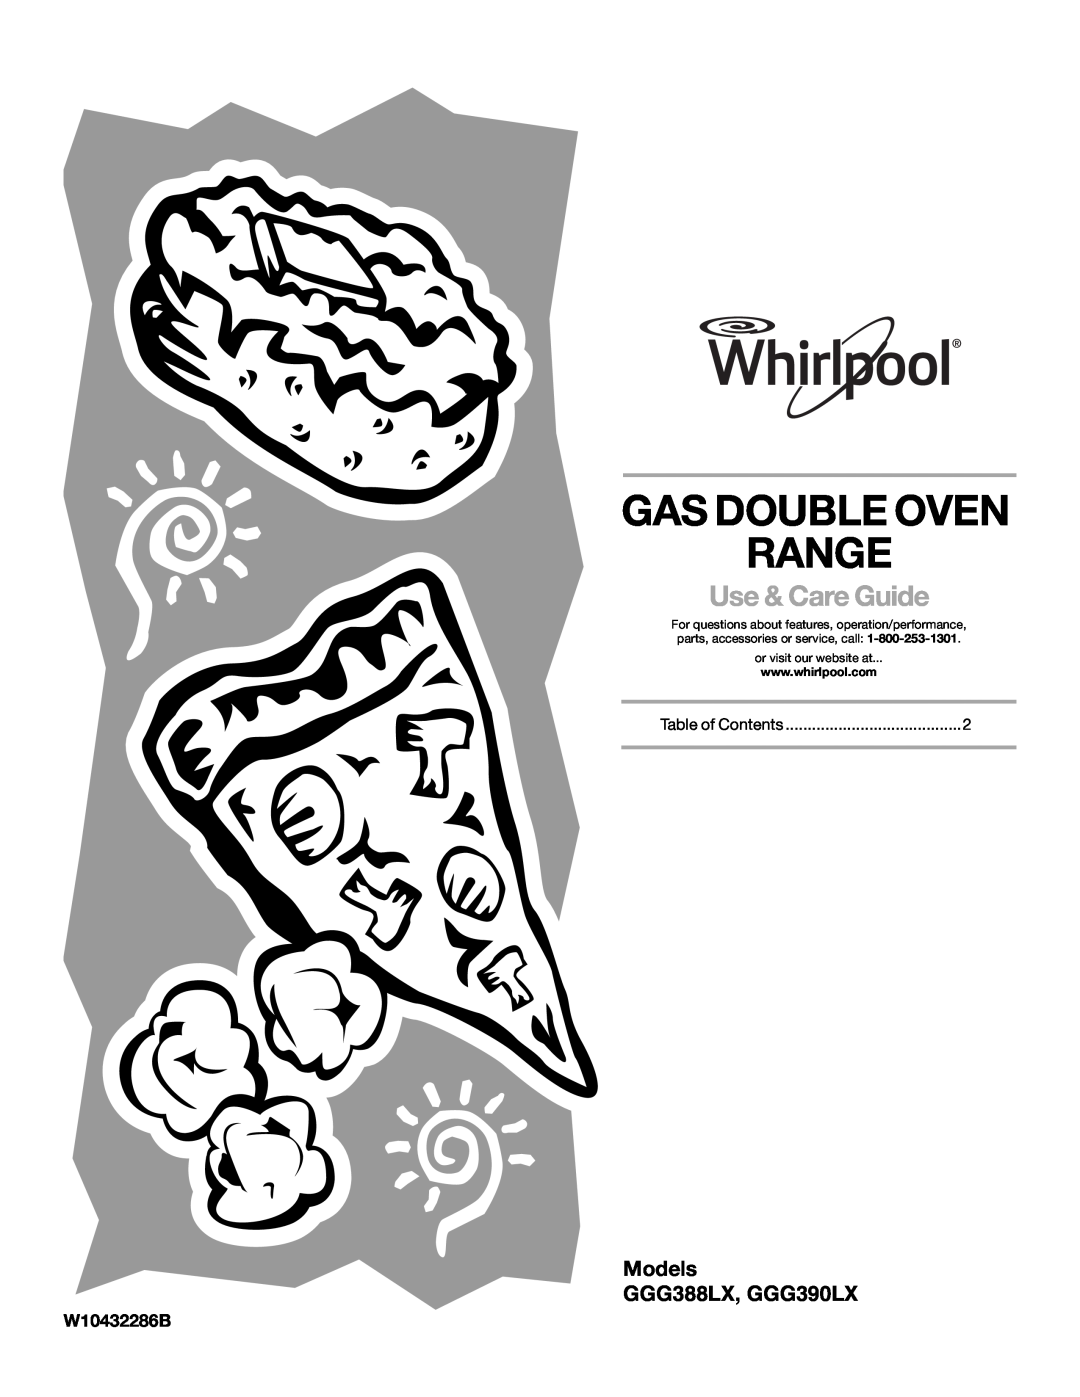 Whirlpool GGG388LX, GGG390LX dimensions Product Model Numbers, GAS SUPPLY REQUIREMENTS Gas supply line, Product Dimensions 